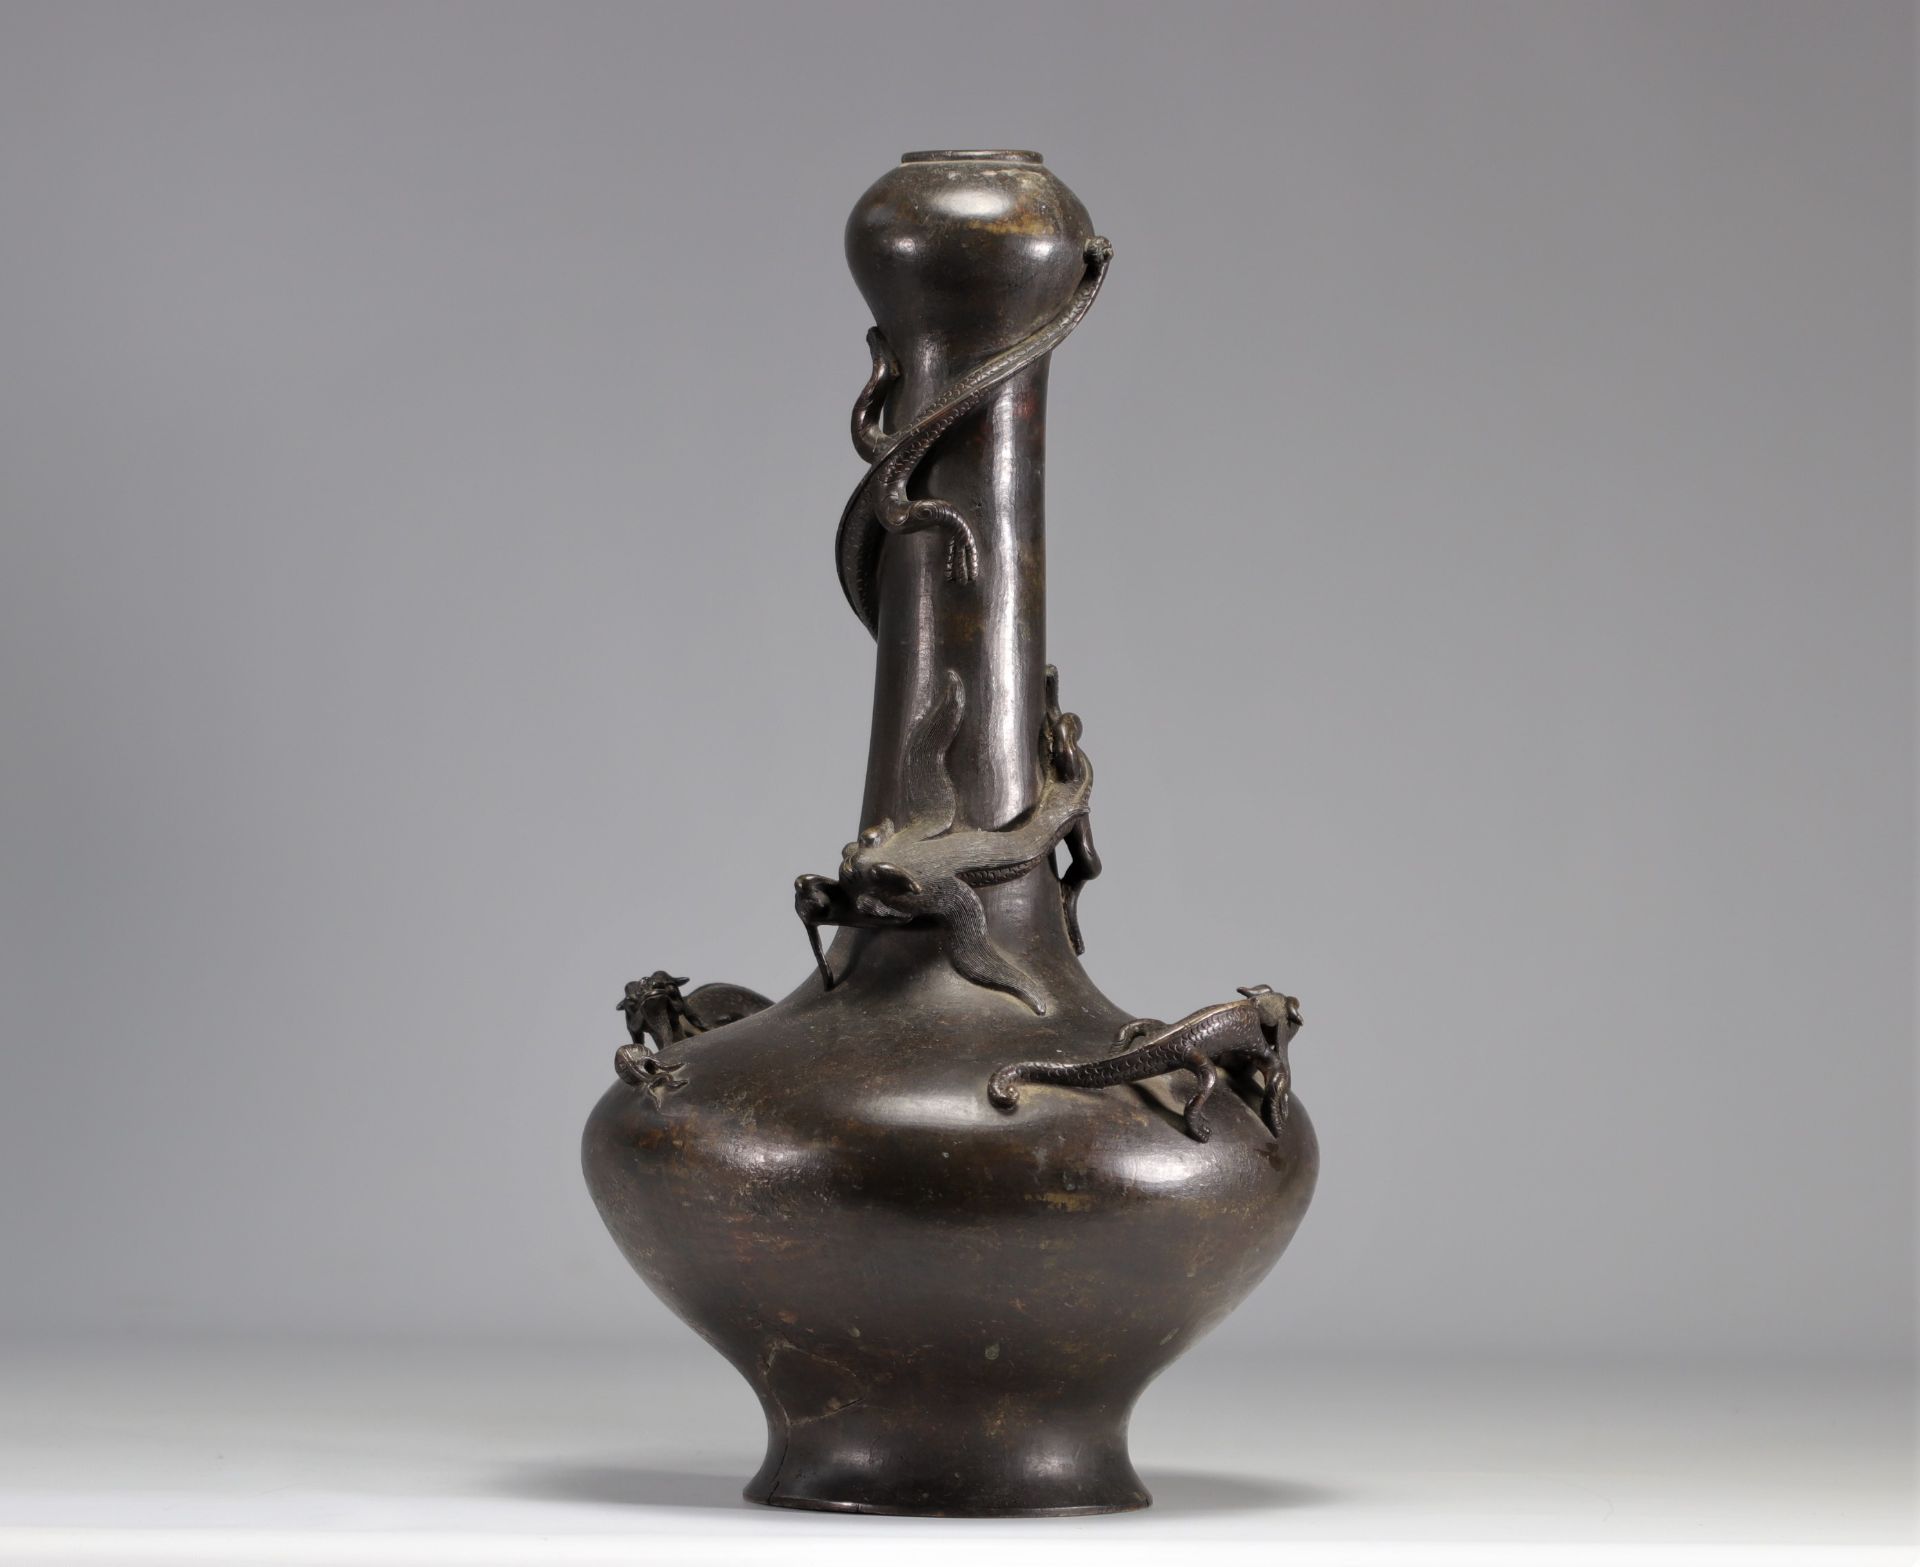 A Xuande Nian Zhi bronze bottle vase decorated with a Chilon from the Ming period (æ˜Žæœ) - Image 4 of 5